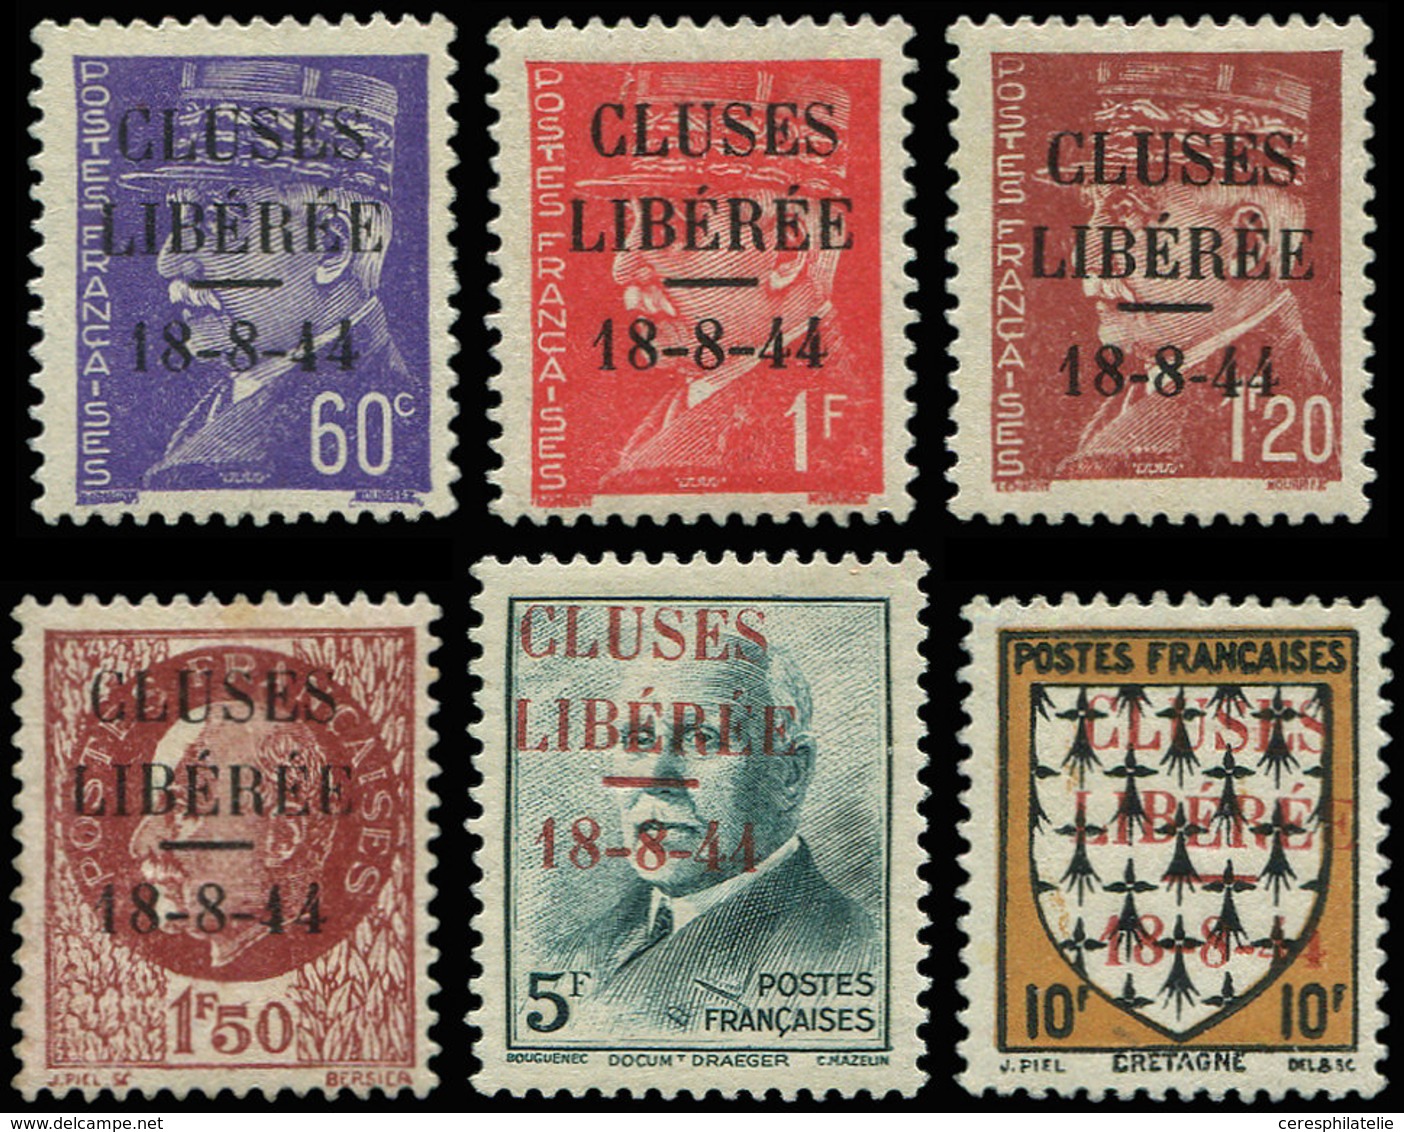 ** TIMBRES DE LIBERATION - CLUSES 1/6 : N°6 Infime Adh., TB - Befreiung